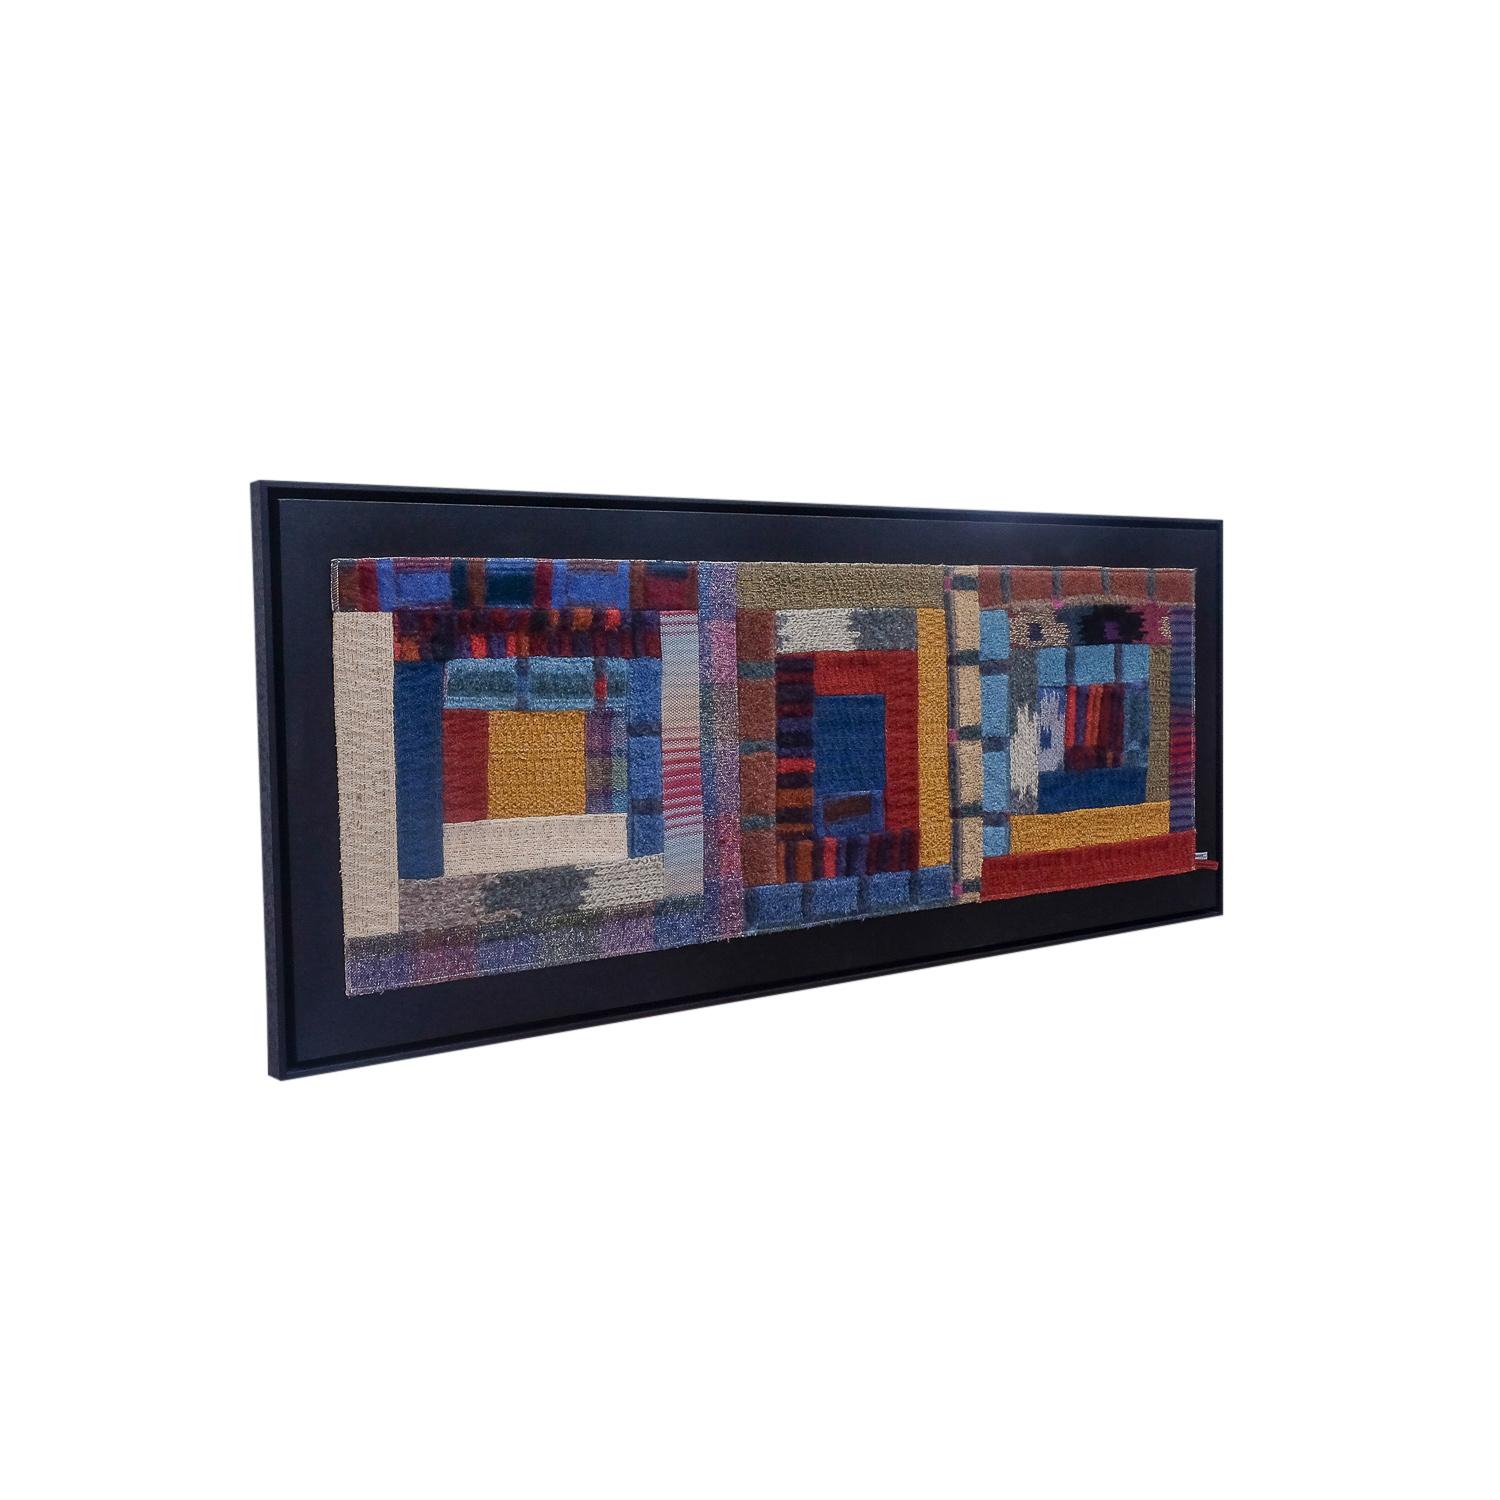 Woolen tapestry, professionally framed. This piece, considered a work of art has been designed by Ottavio Missoni, (1921 – 2013) during the 1980s.

The Missoni enterprise was founded during the early 1950s, over the years the business became one of